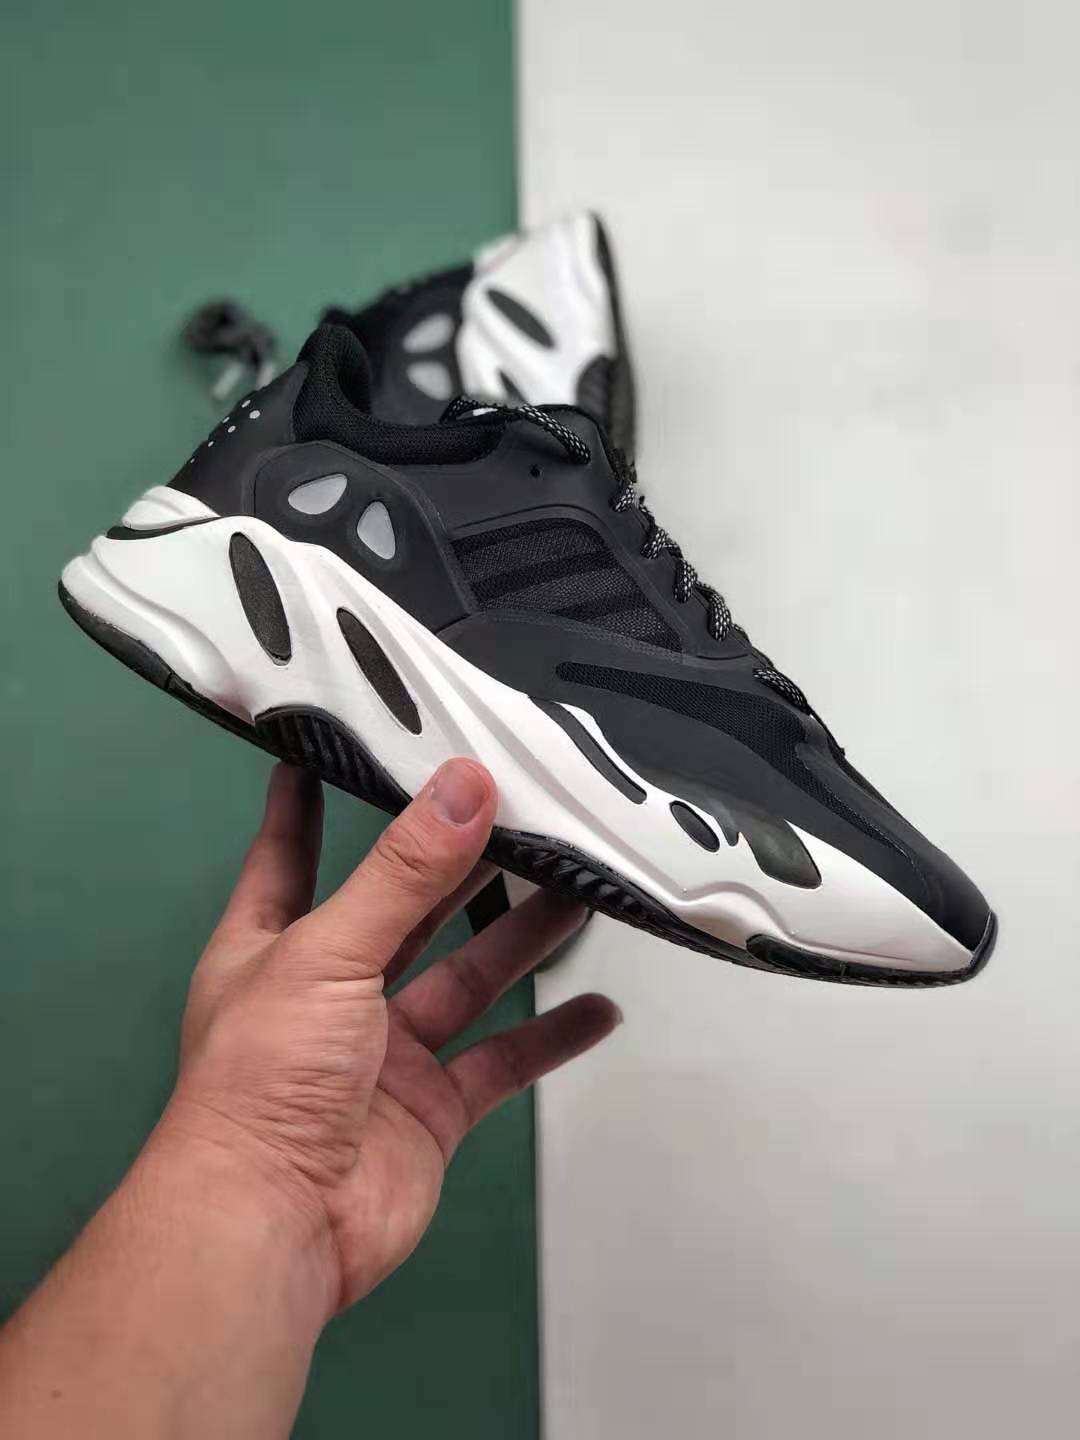 Adidas Yeezy Boost 700 Black White EG6991 | Limited Edition Sneakers